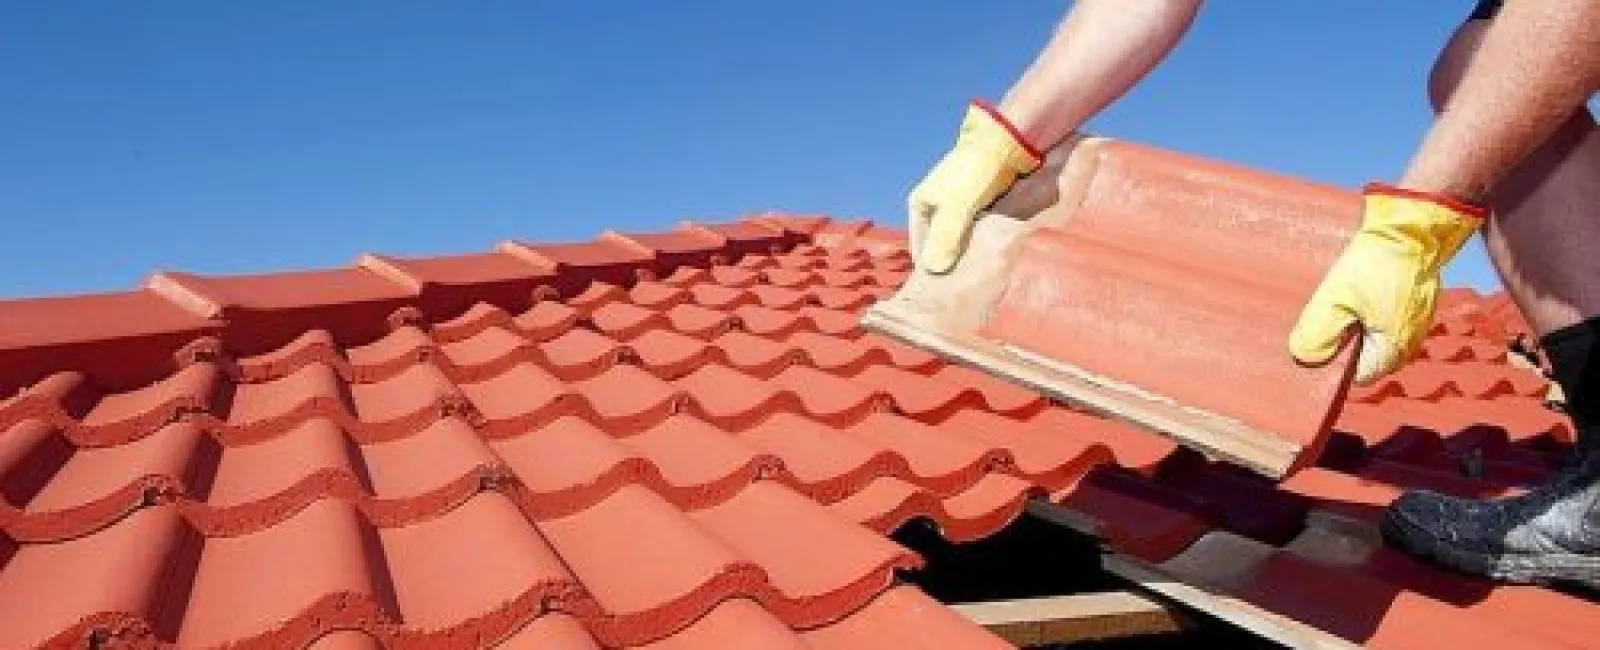 Questions to ask Potential Roofing Contractors